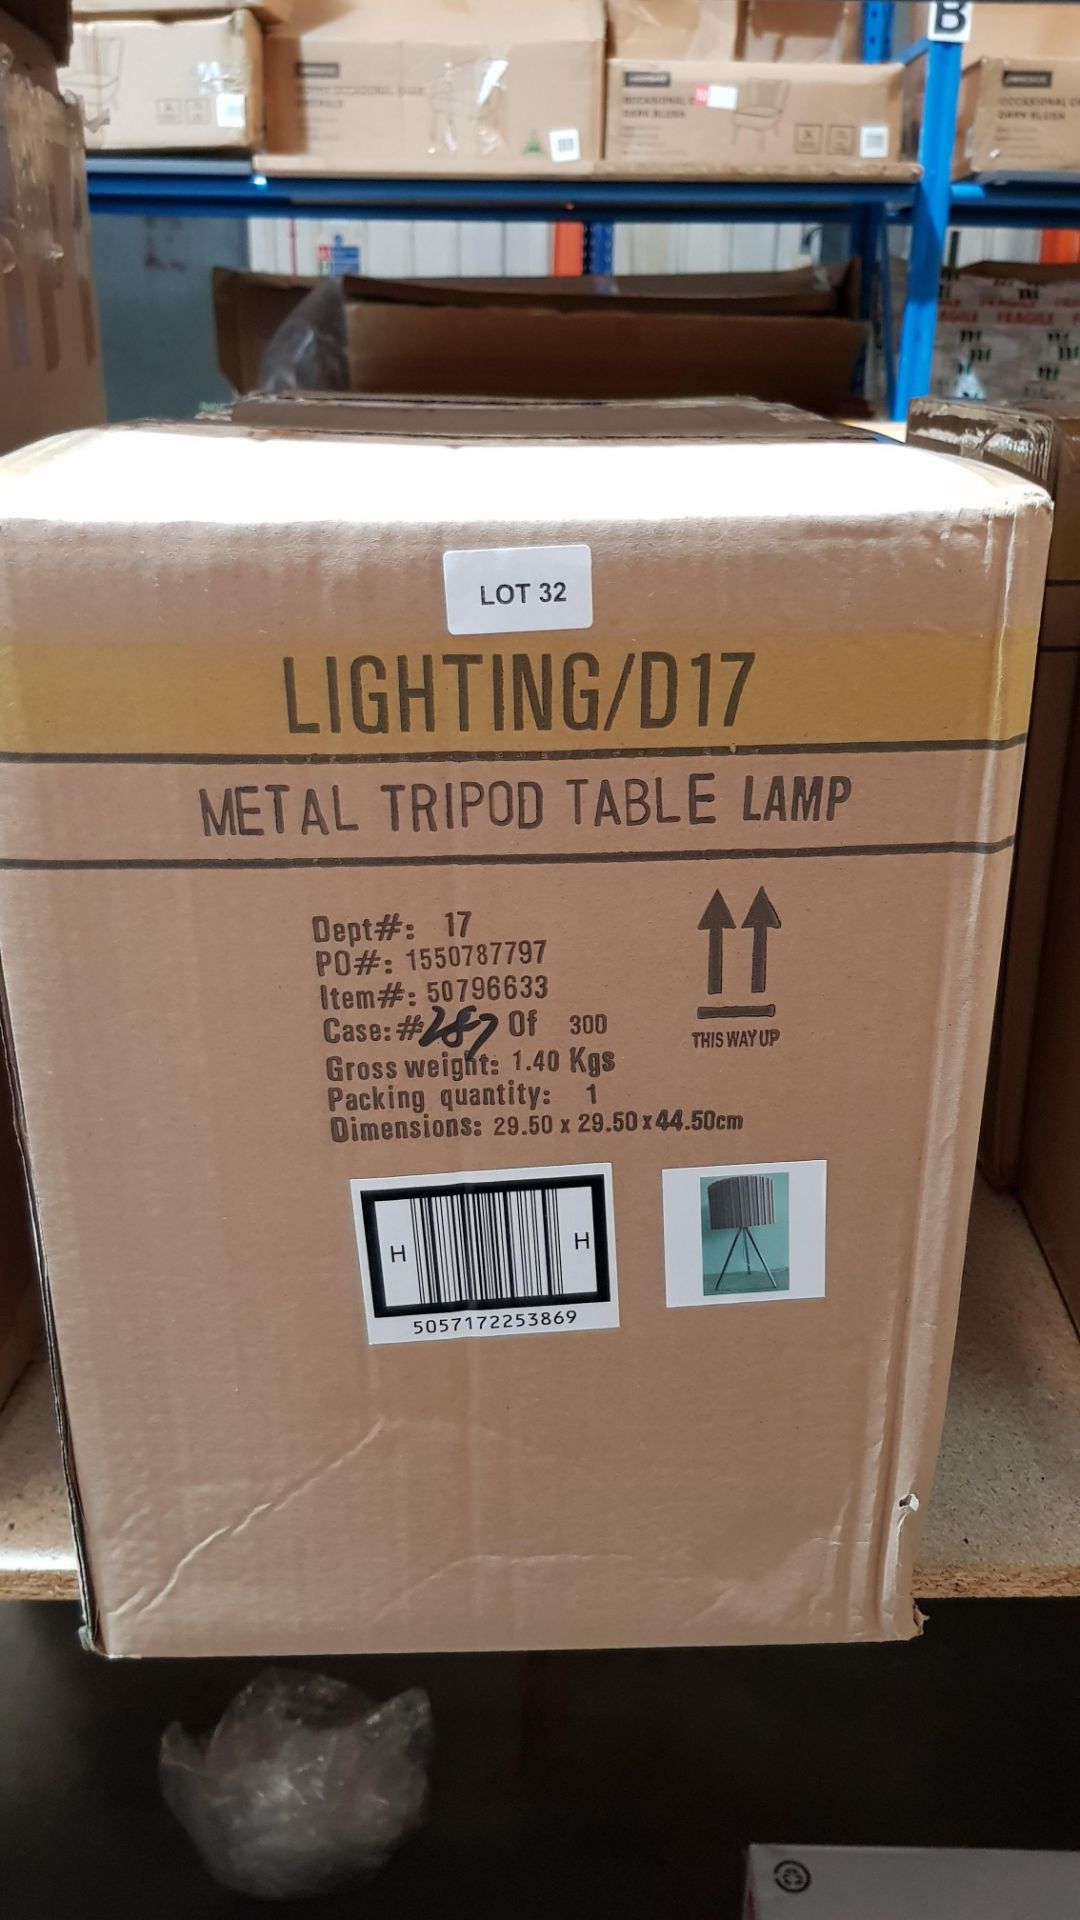 (R6B) Lighting. 2 X Metal Tripod Table Lamp (May Contain Undelivered / Wrong Item Return Sticker) - Image 2 of 2